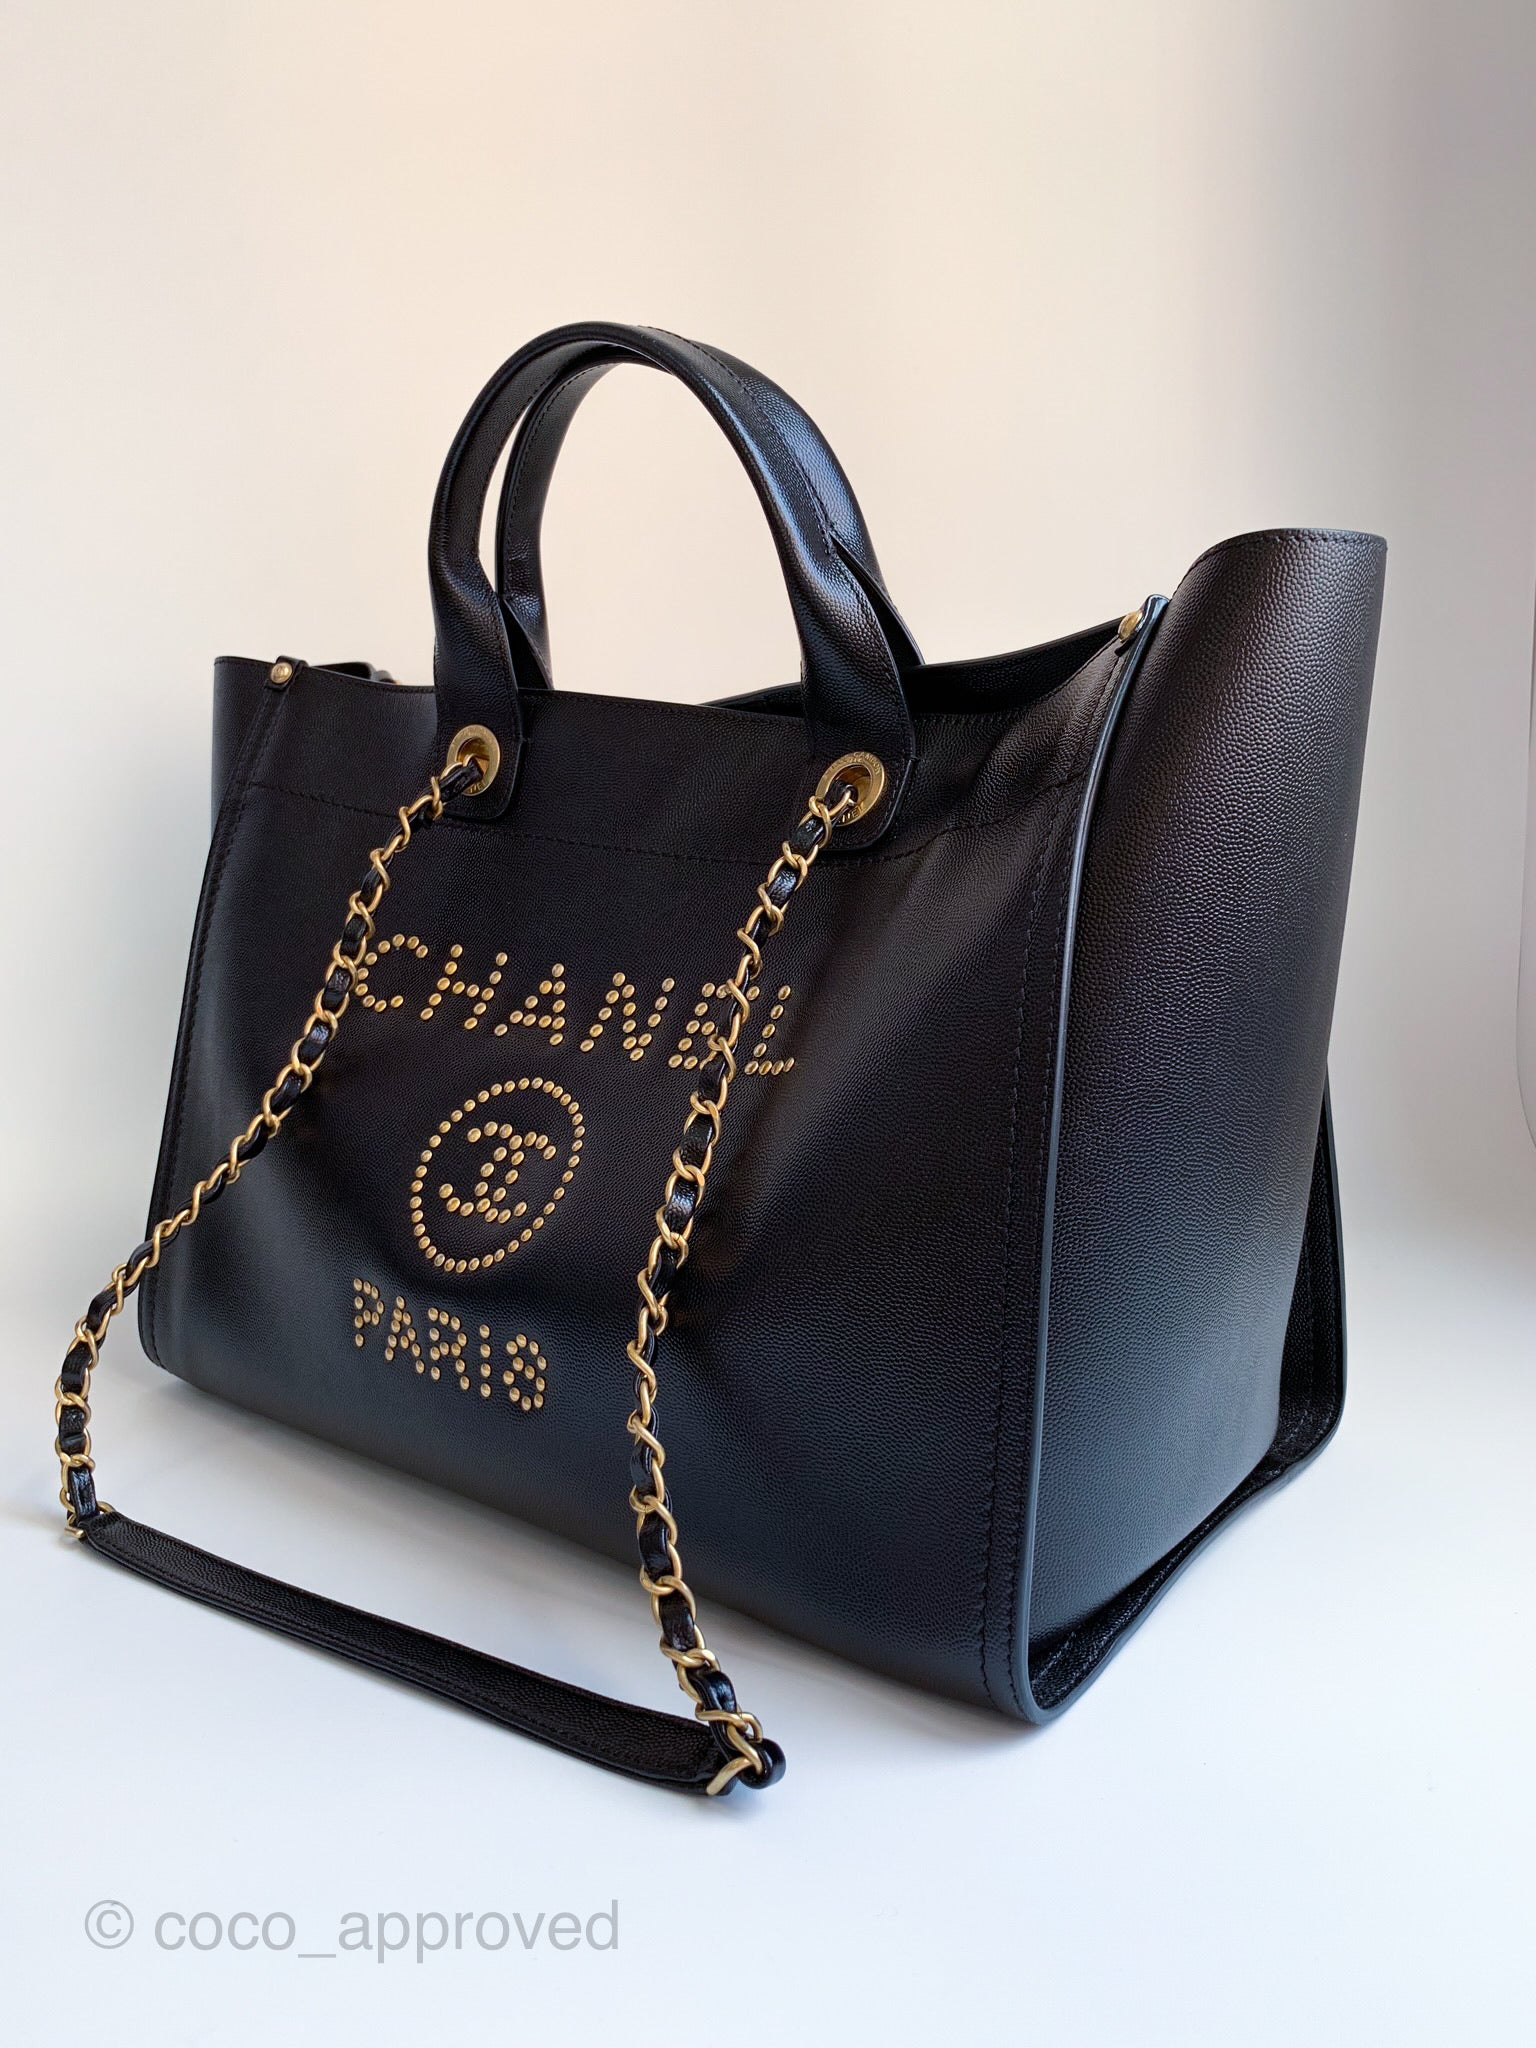 Chanel Deauville Large Shopping Tote Black Calfskin